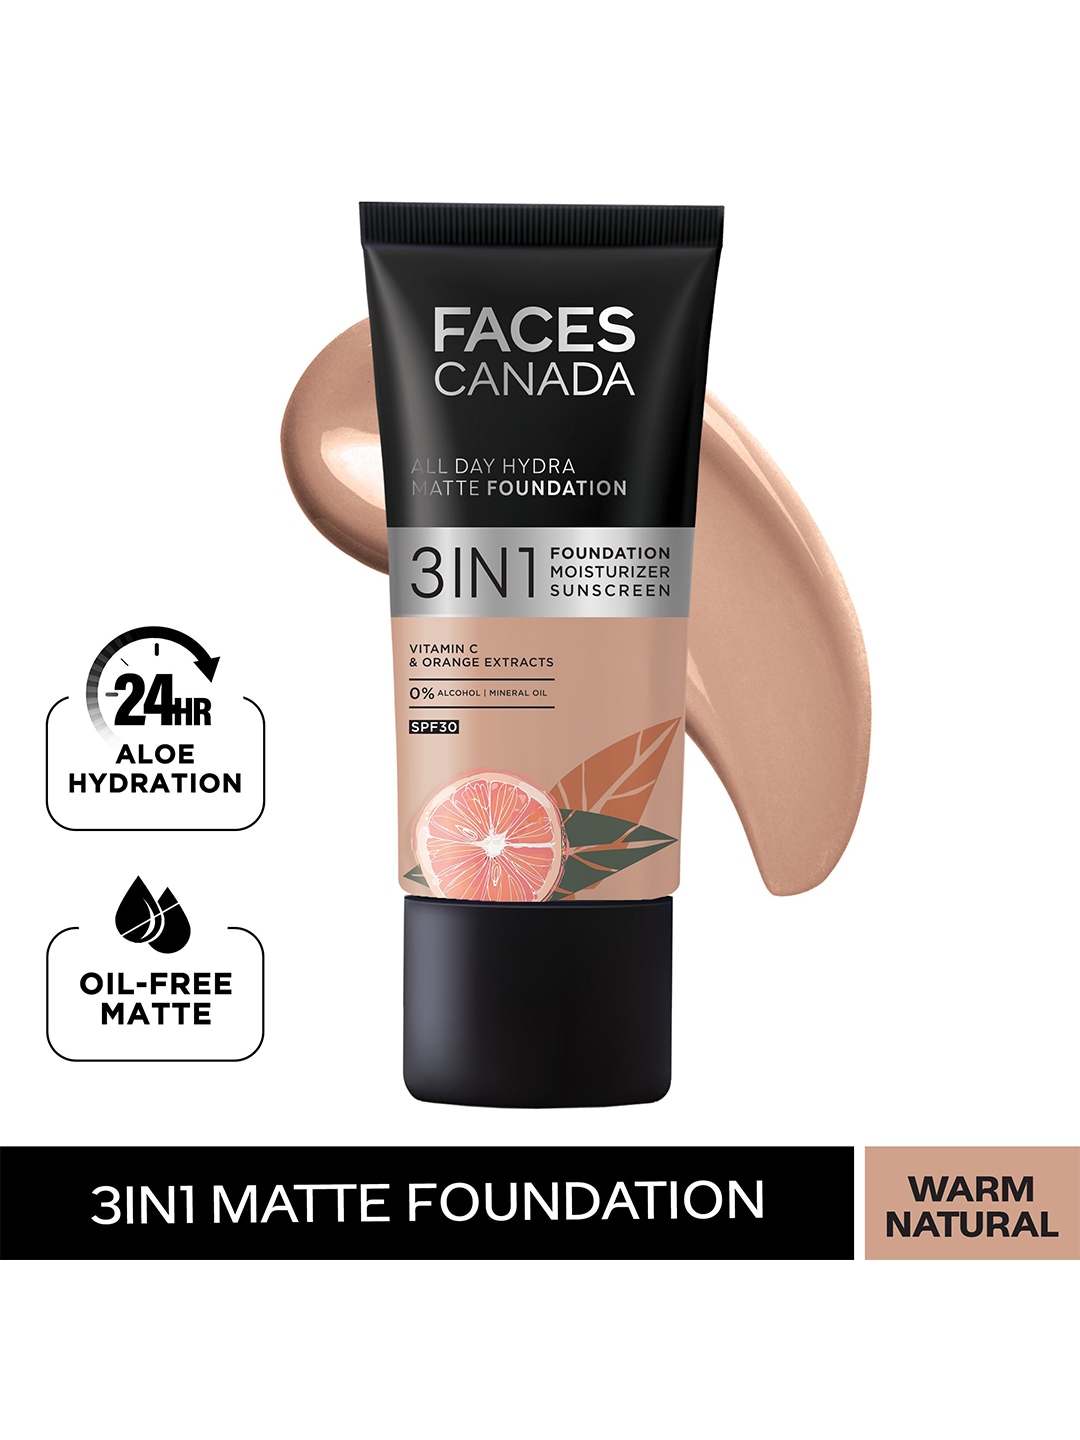 FACES CANADA All Day Hydra Matte 3 in 1 Matte Foundation Warm Natural 021 Price in India